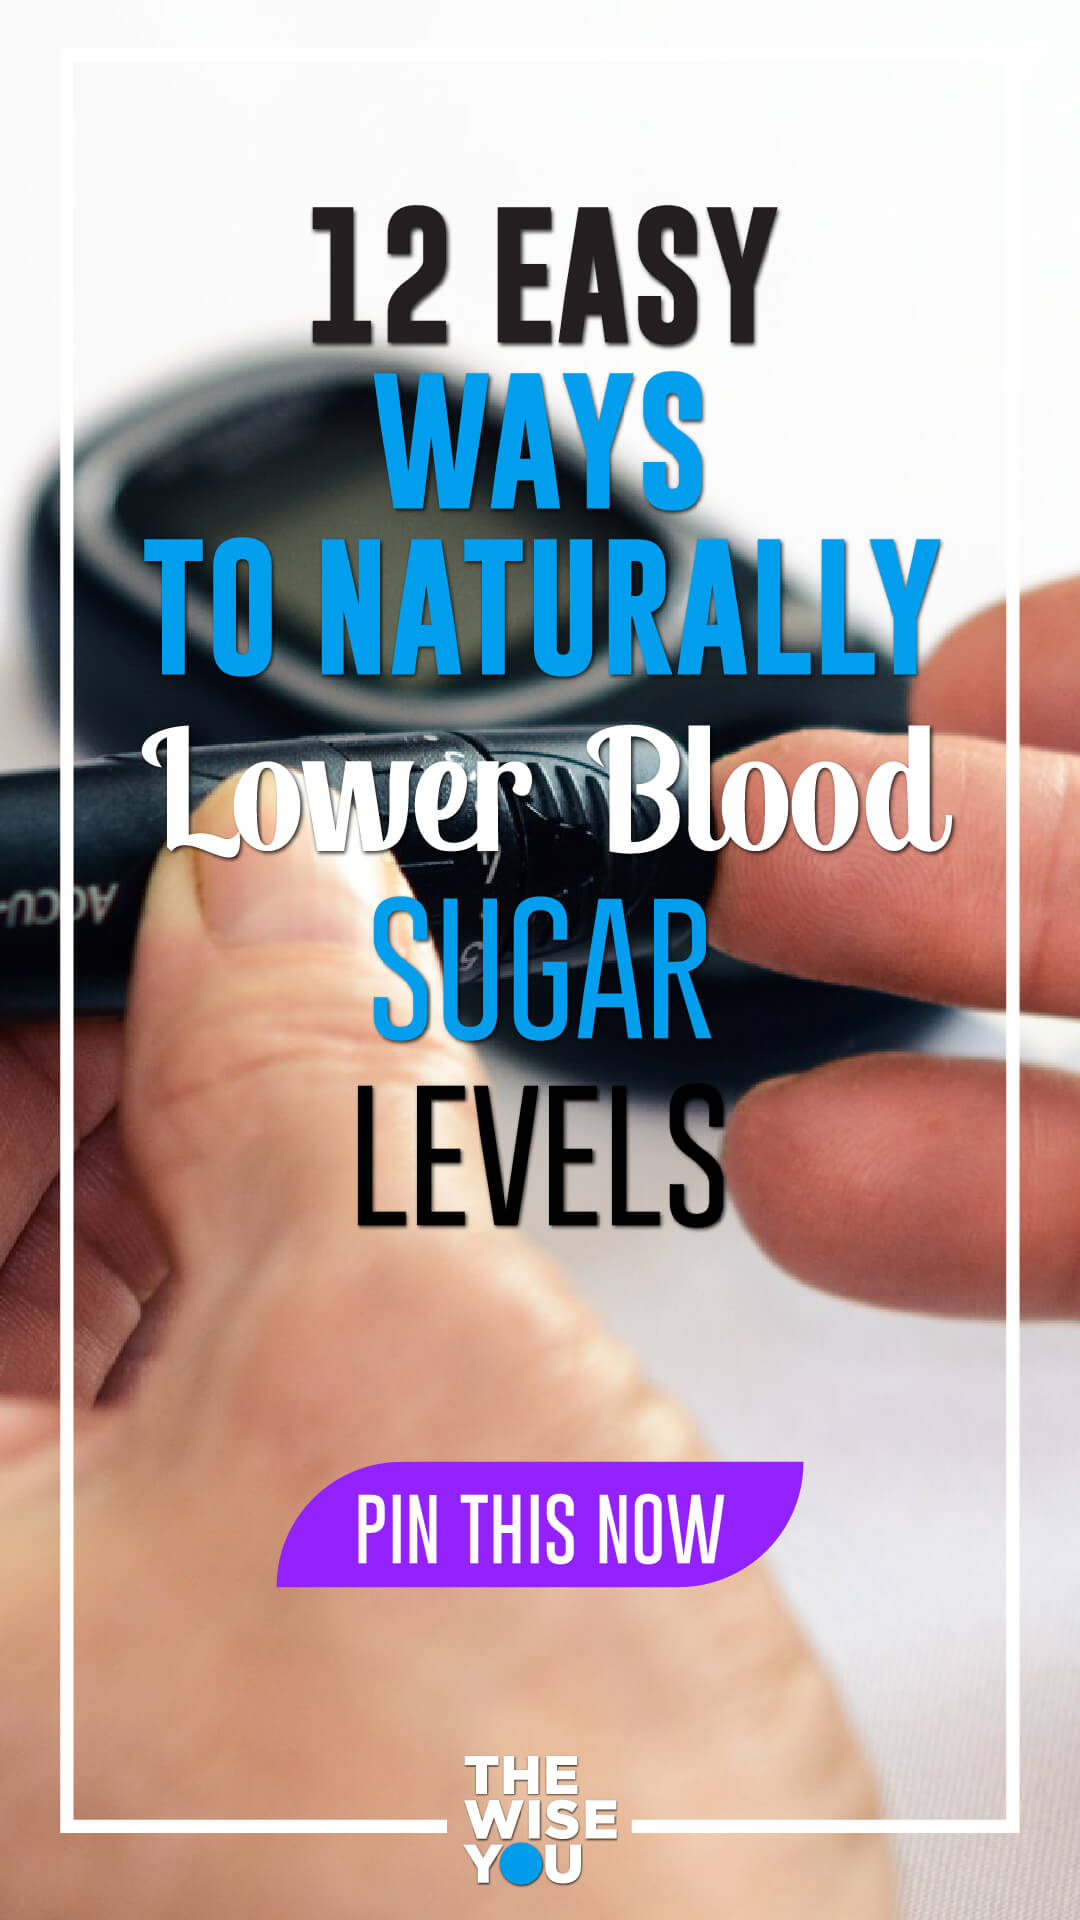 12 Easy Ways to Naturally Lower Blood Sugar Levels